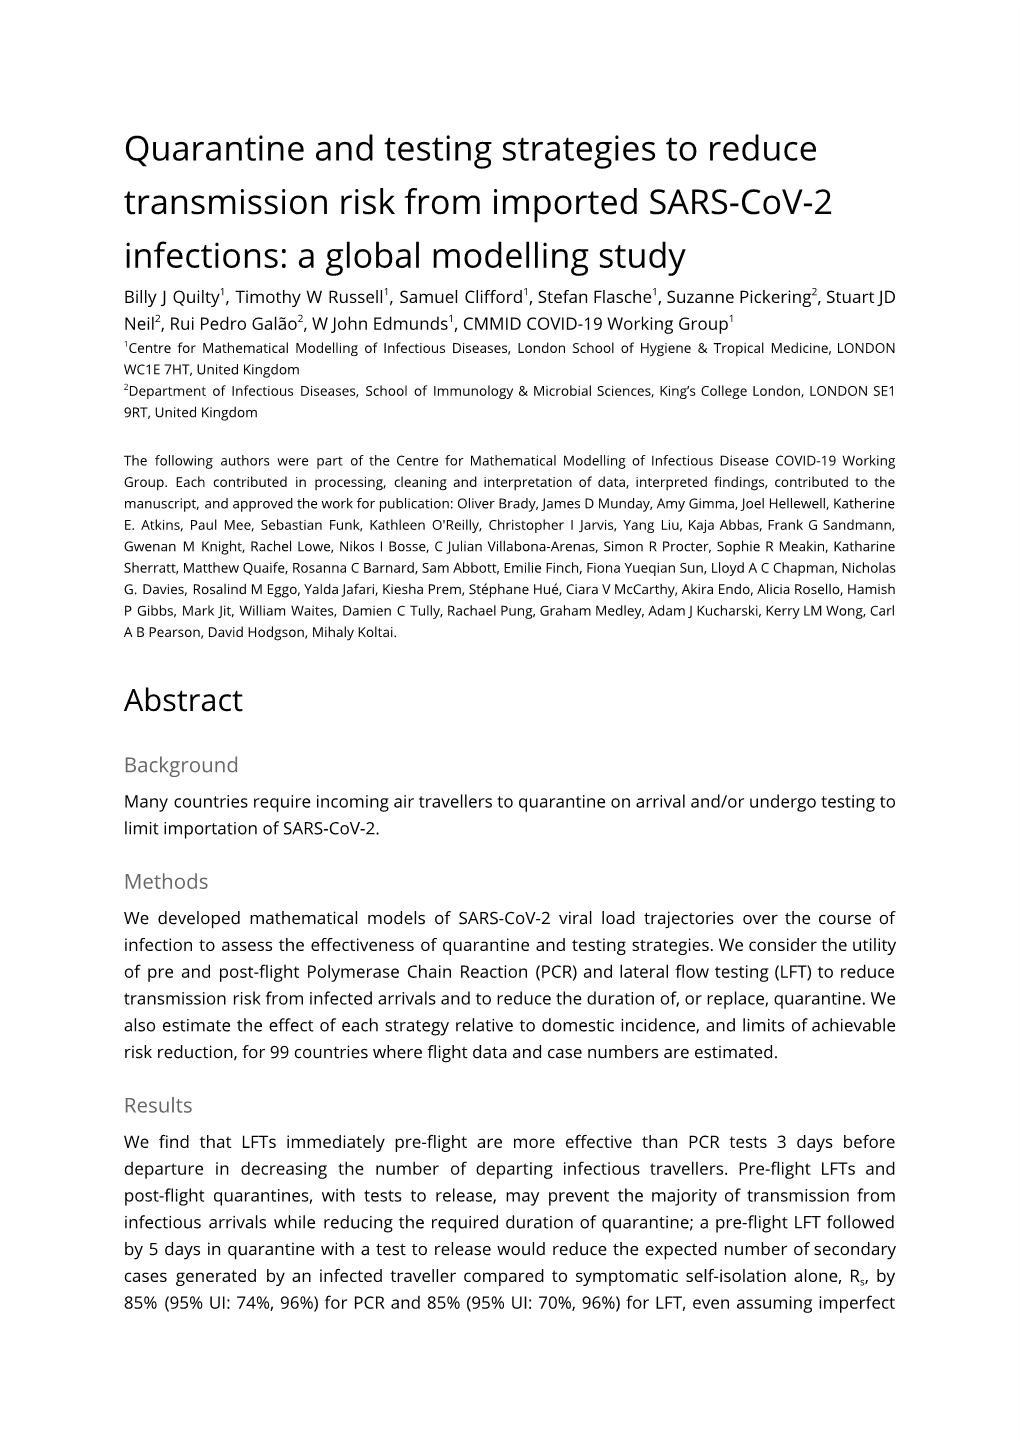 Quarantine and Testing Strategies to Reduce the Risk of Transmission from Imported SARS-Cov-2 Infections: a Global Modelling